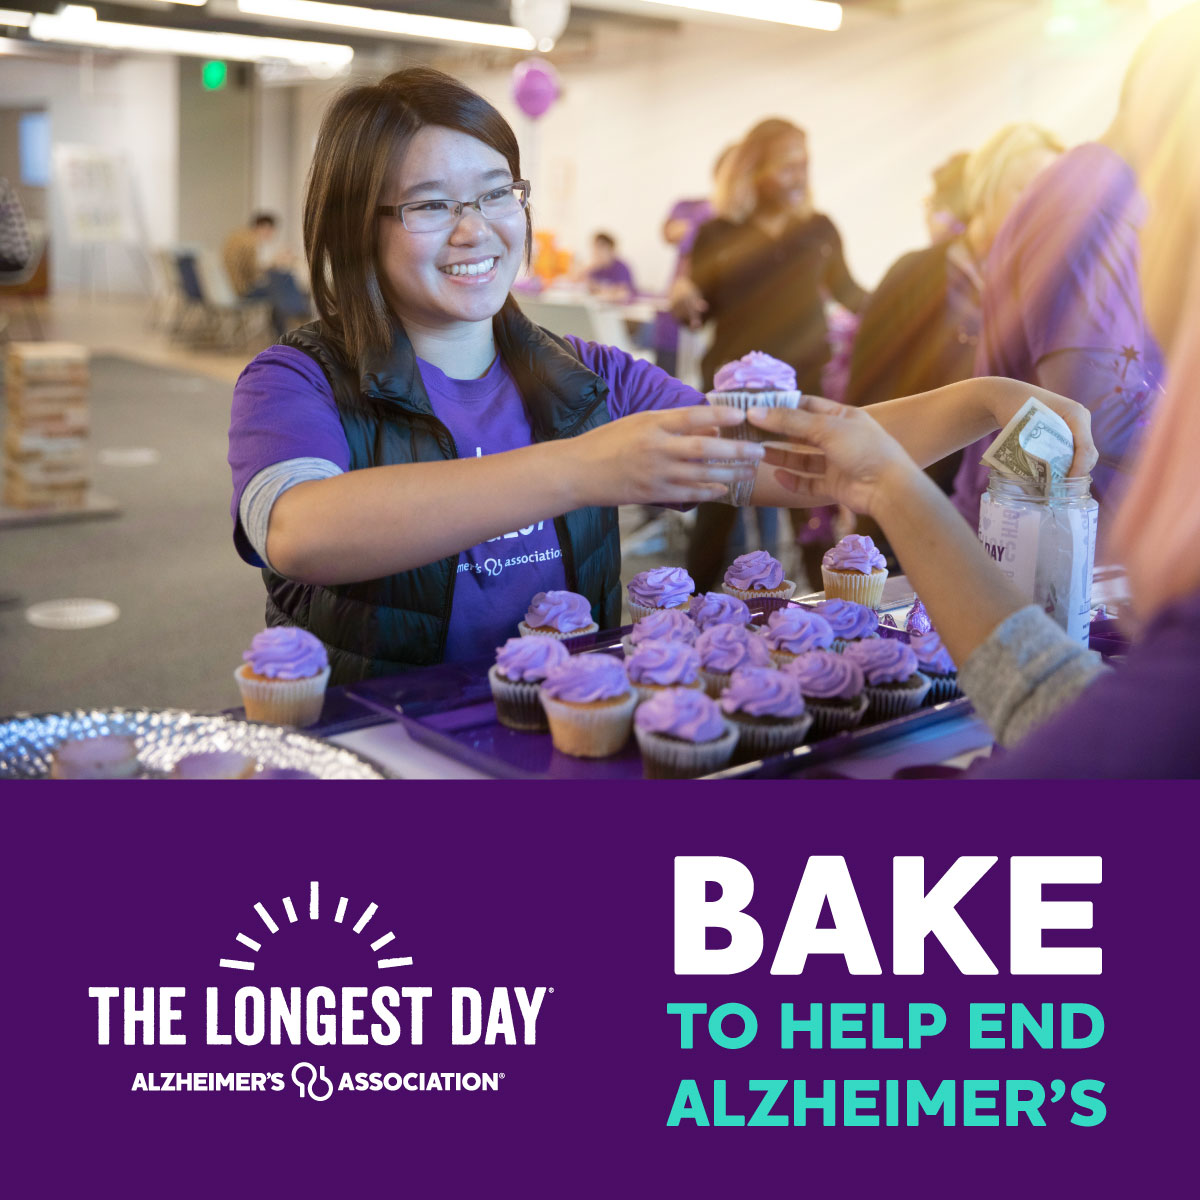 Let's dough this! For #WorldBakingDay, encourage someone who loves to bake to get involved in #TheLongestDay: alz.org/TLDbaking.